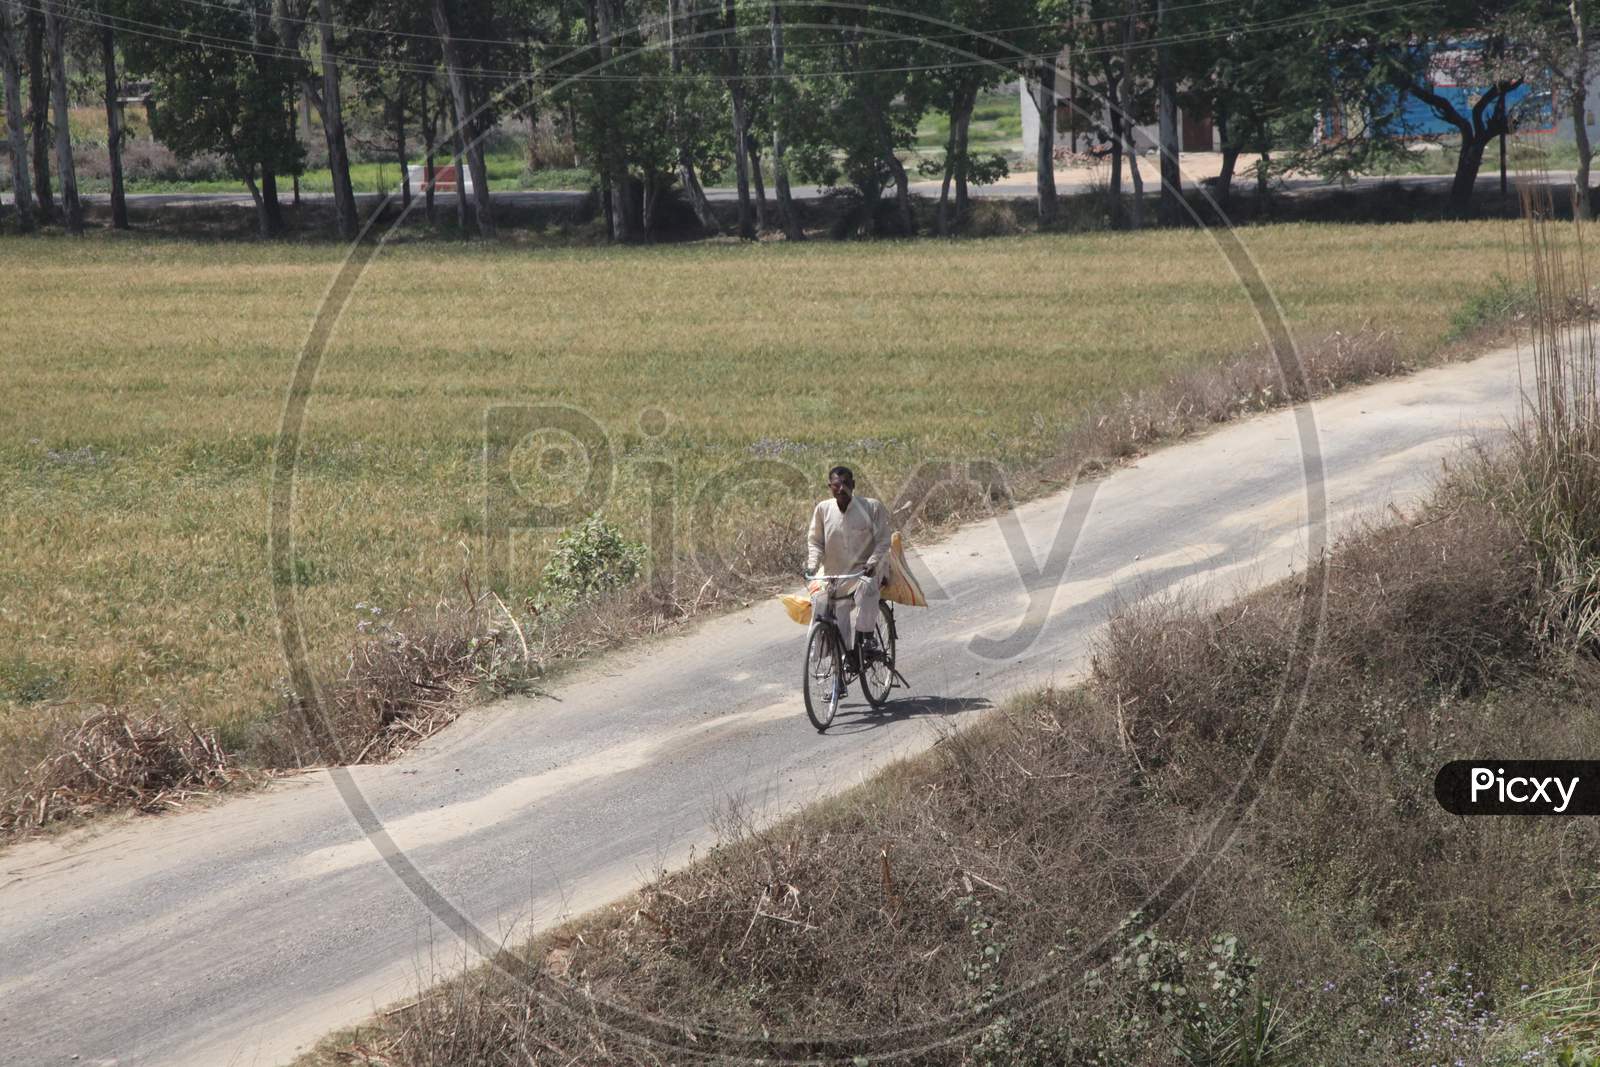 A Person riding a bicycle on a single lane road